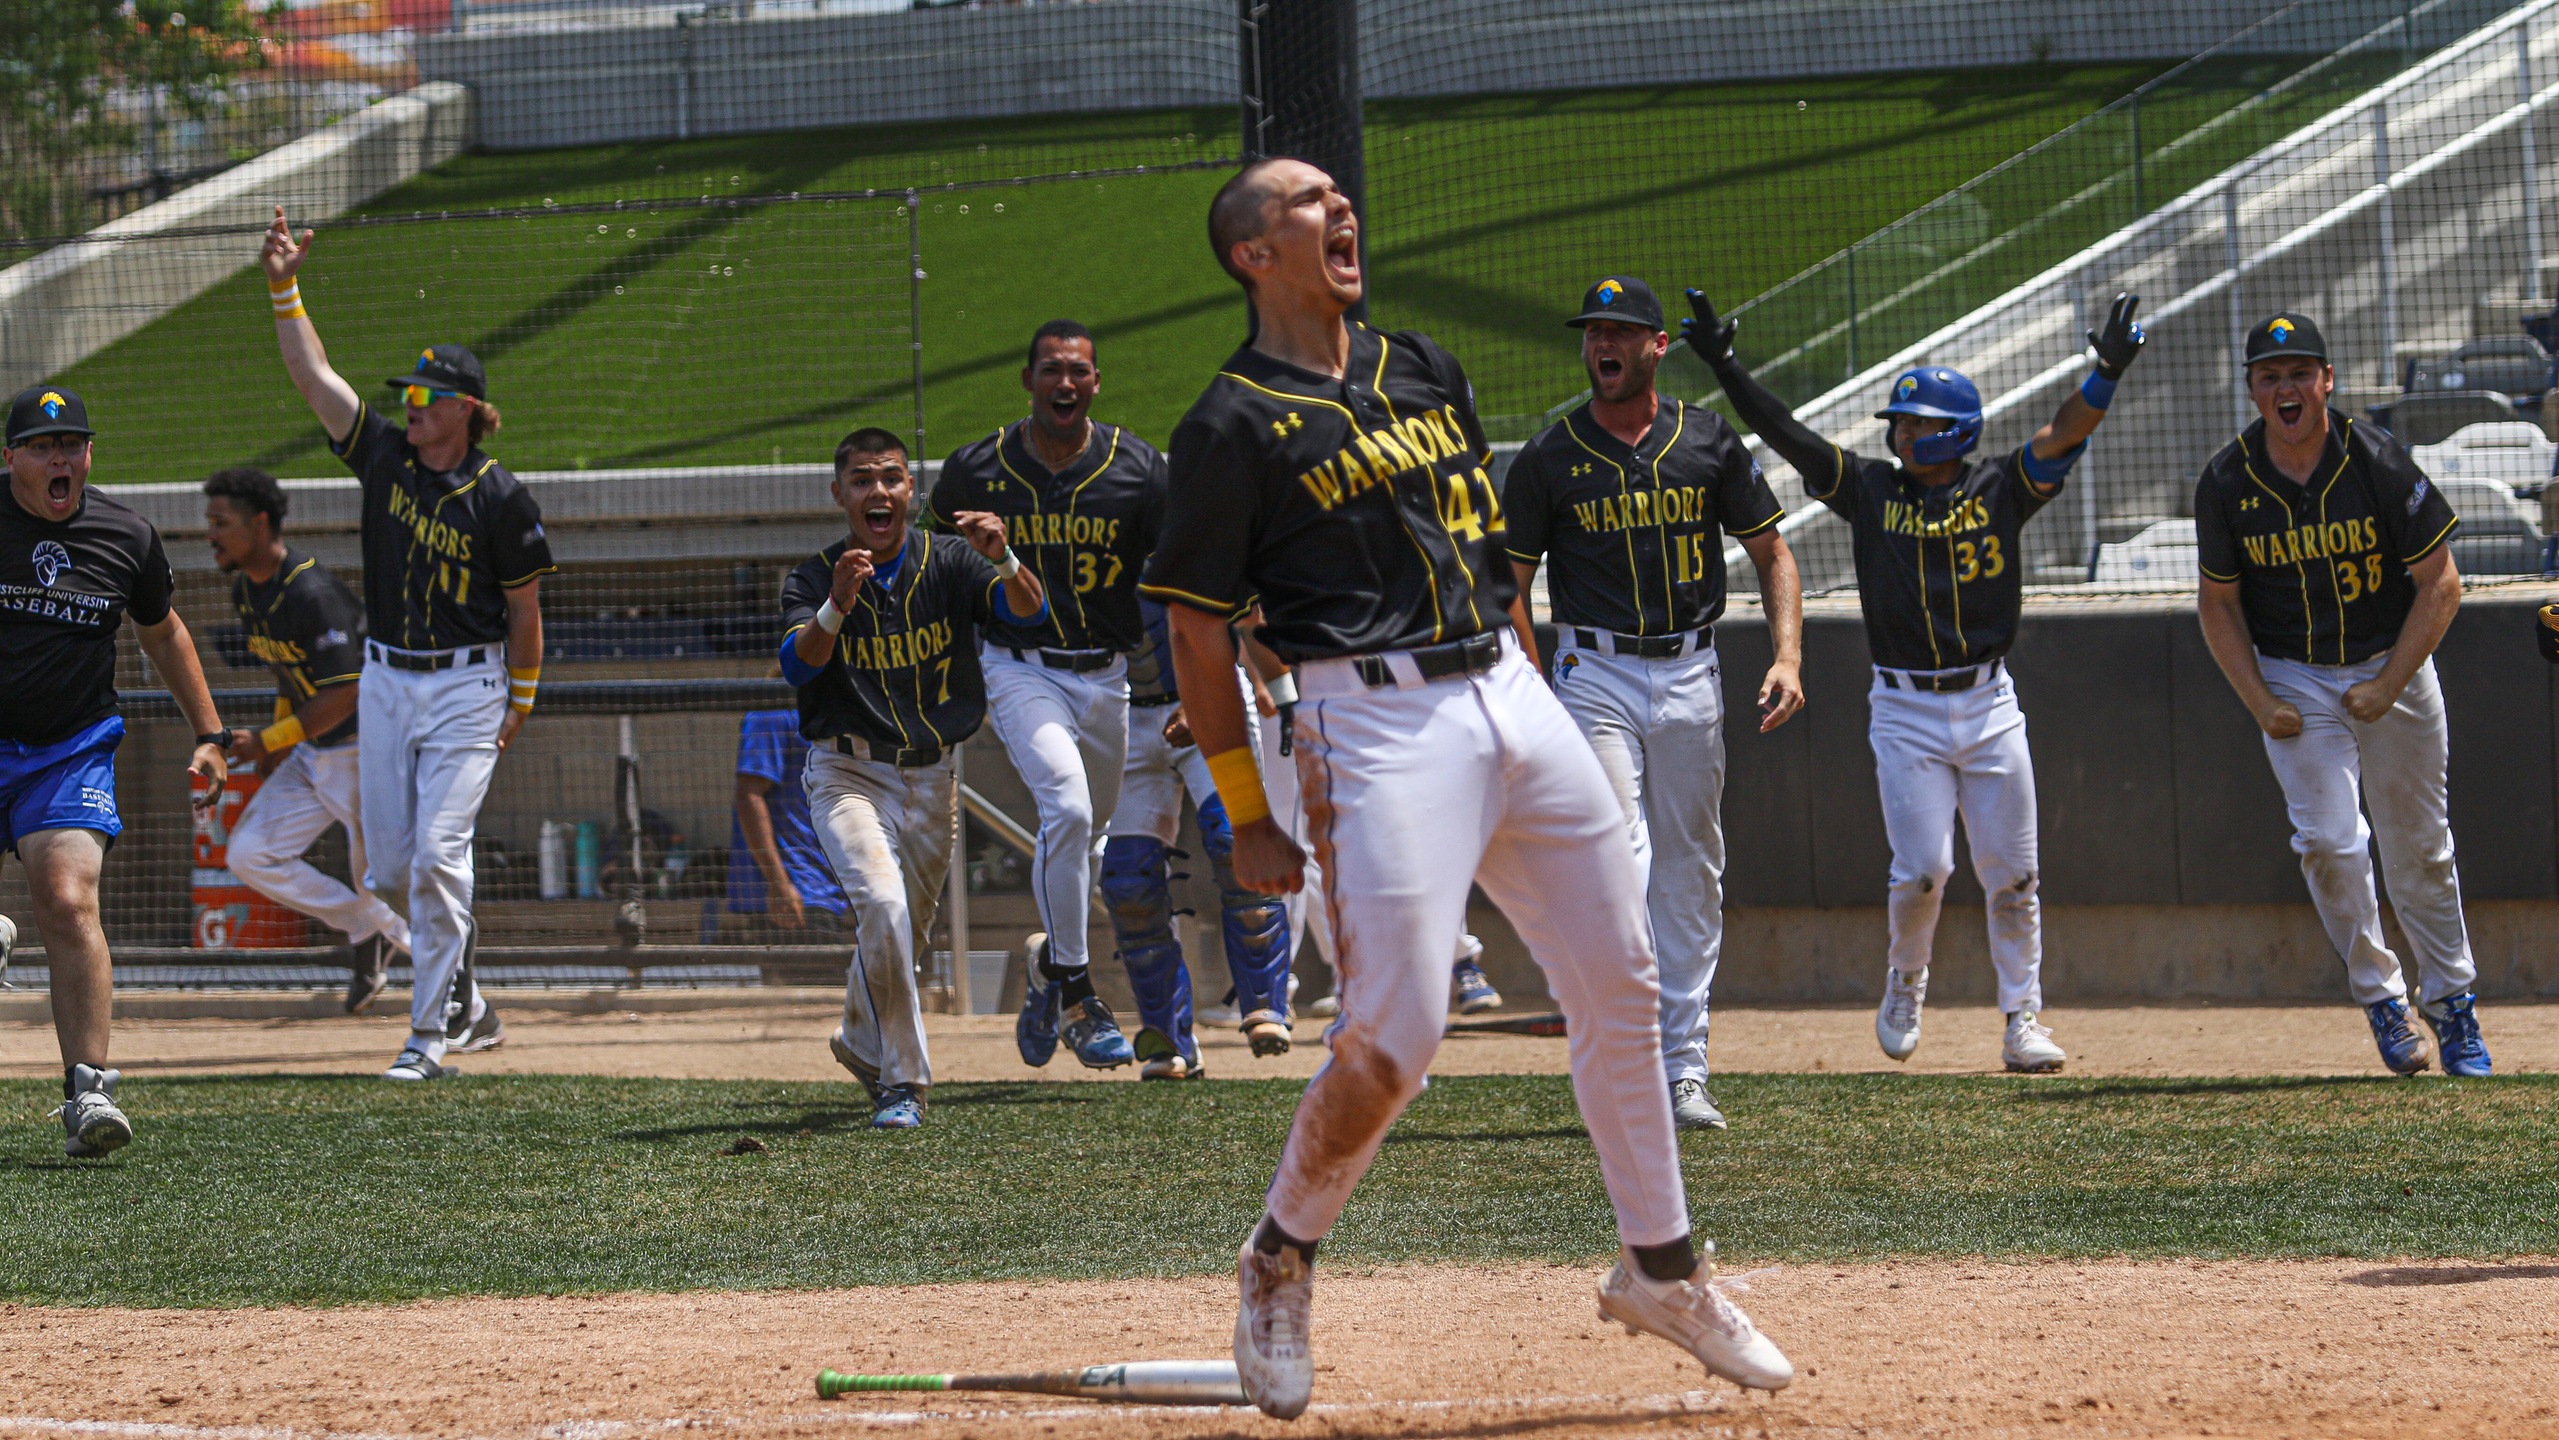 Uly Duran scores the game-winning run Saturday at the Great Park. Photo by Adrian Wilson.